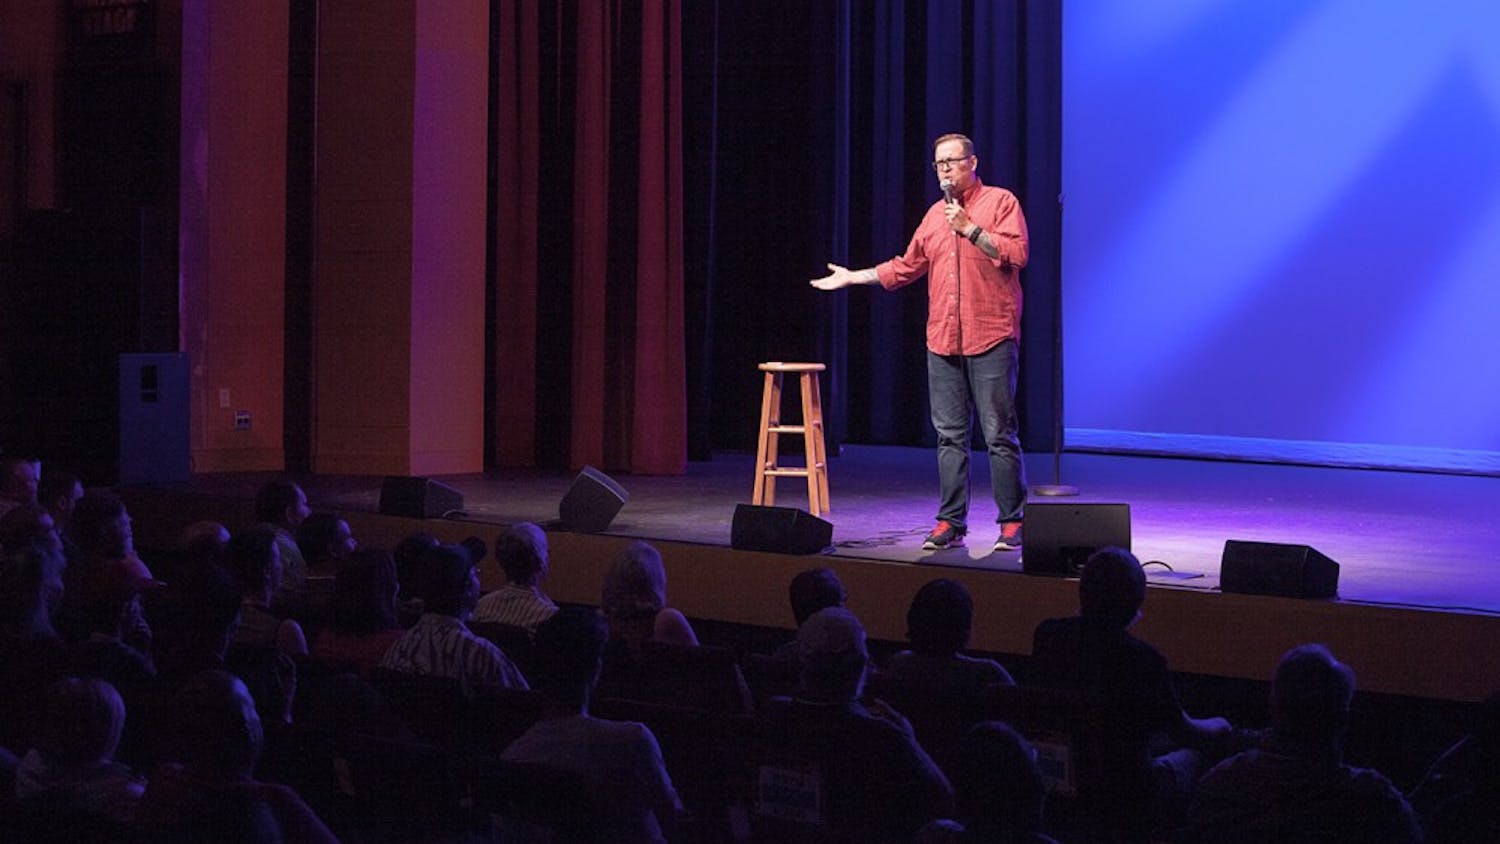 Bob Nugent is a comedian based in Bloomington. His podcast 'History Bluffs' has featured a variety of comedians, and he will perform alongside three other comedians during the latest High Proof Laughs event at Cardinal Spirits.